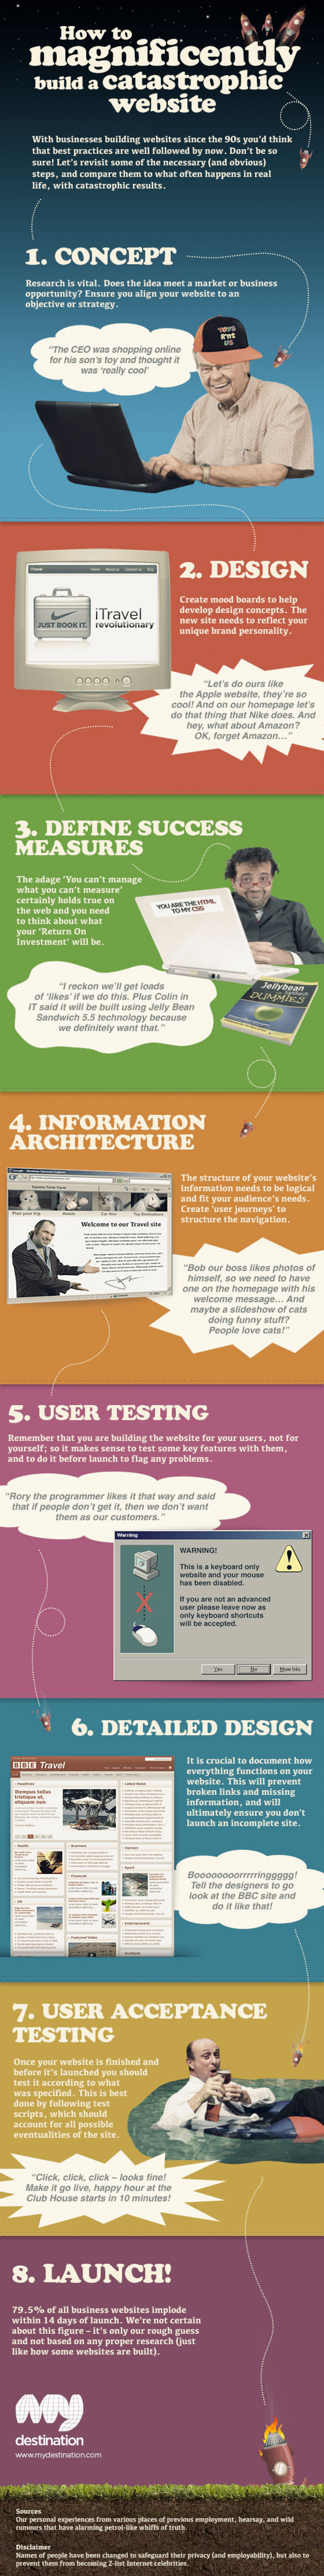 How to Magnificently Build a Catastrophic Website Infographic